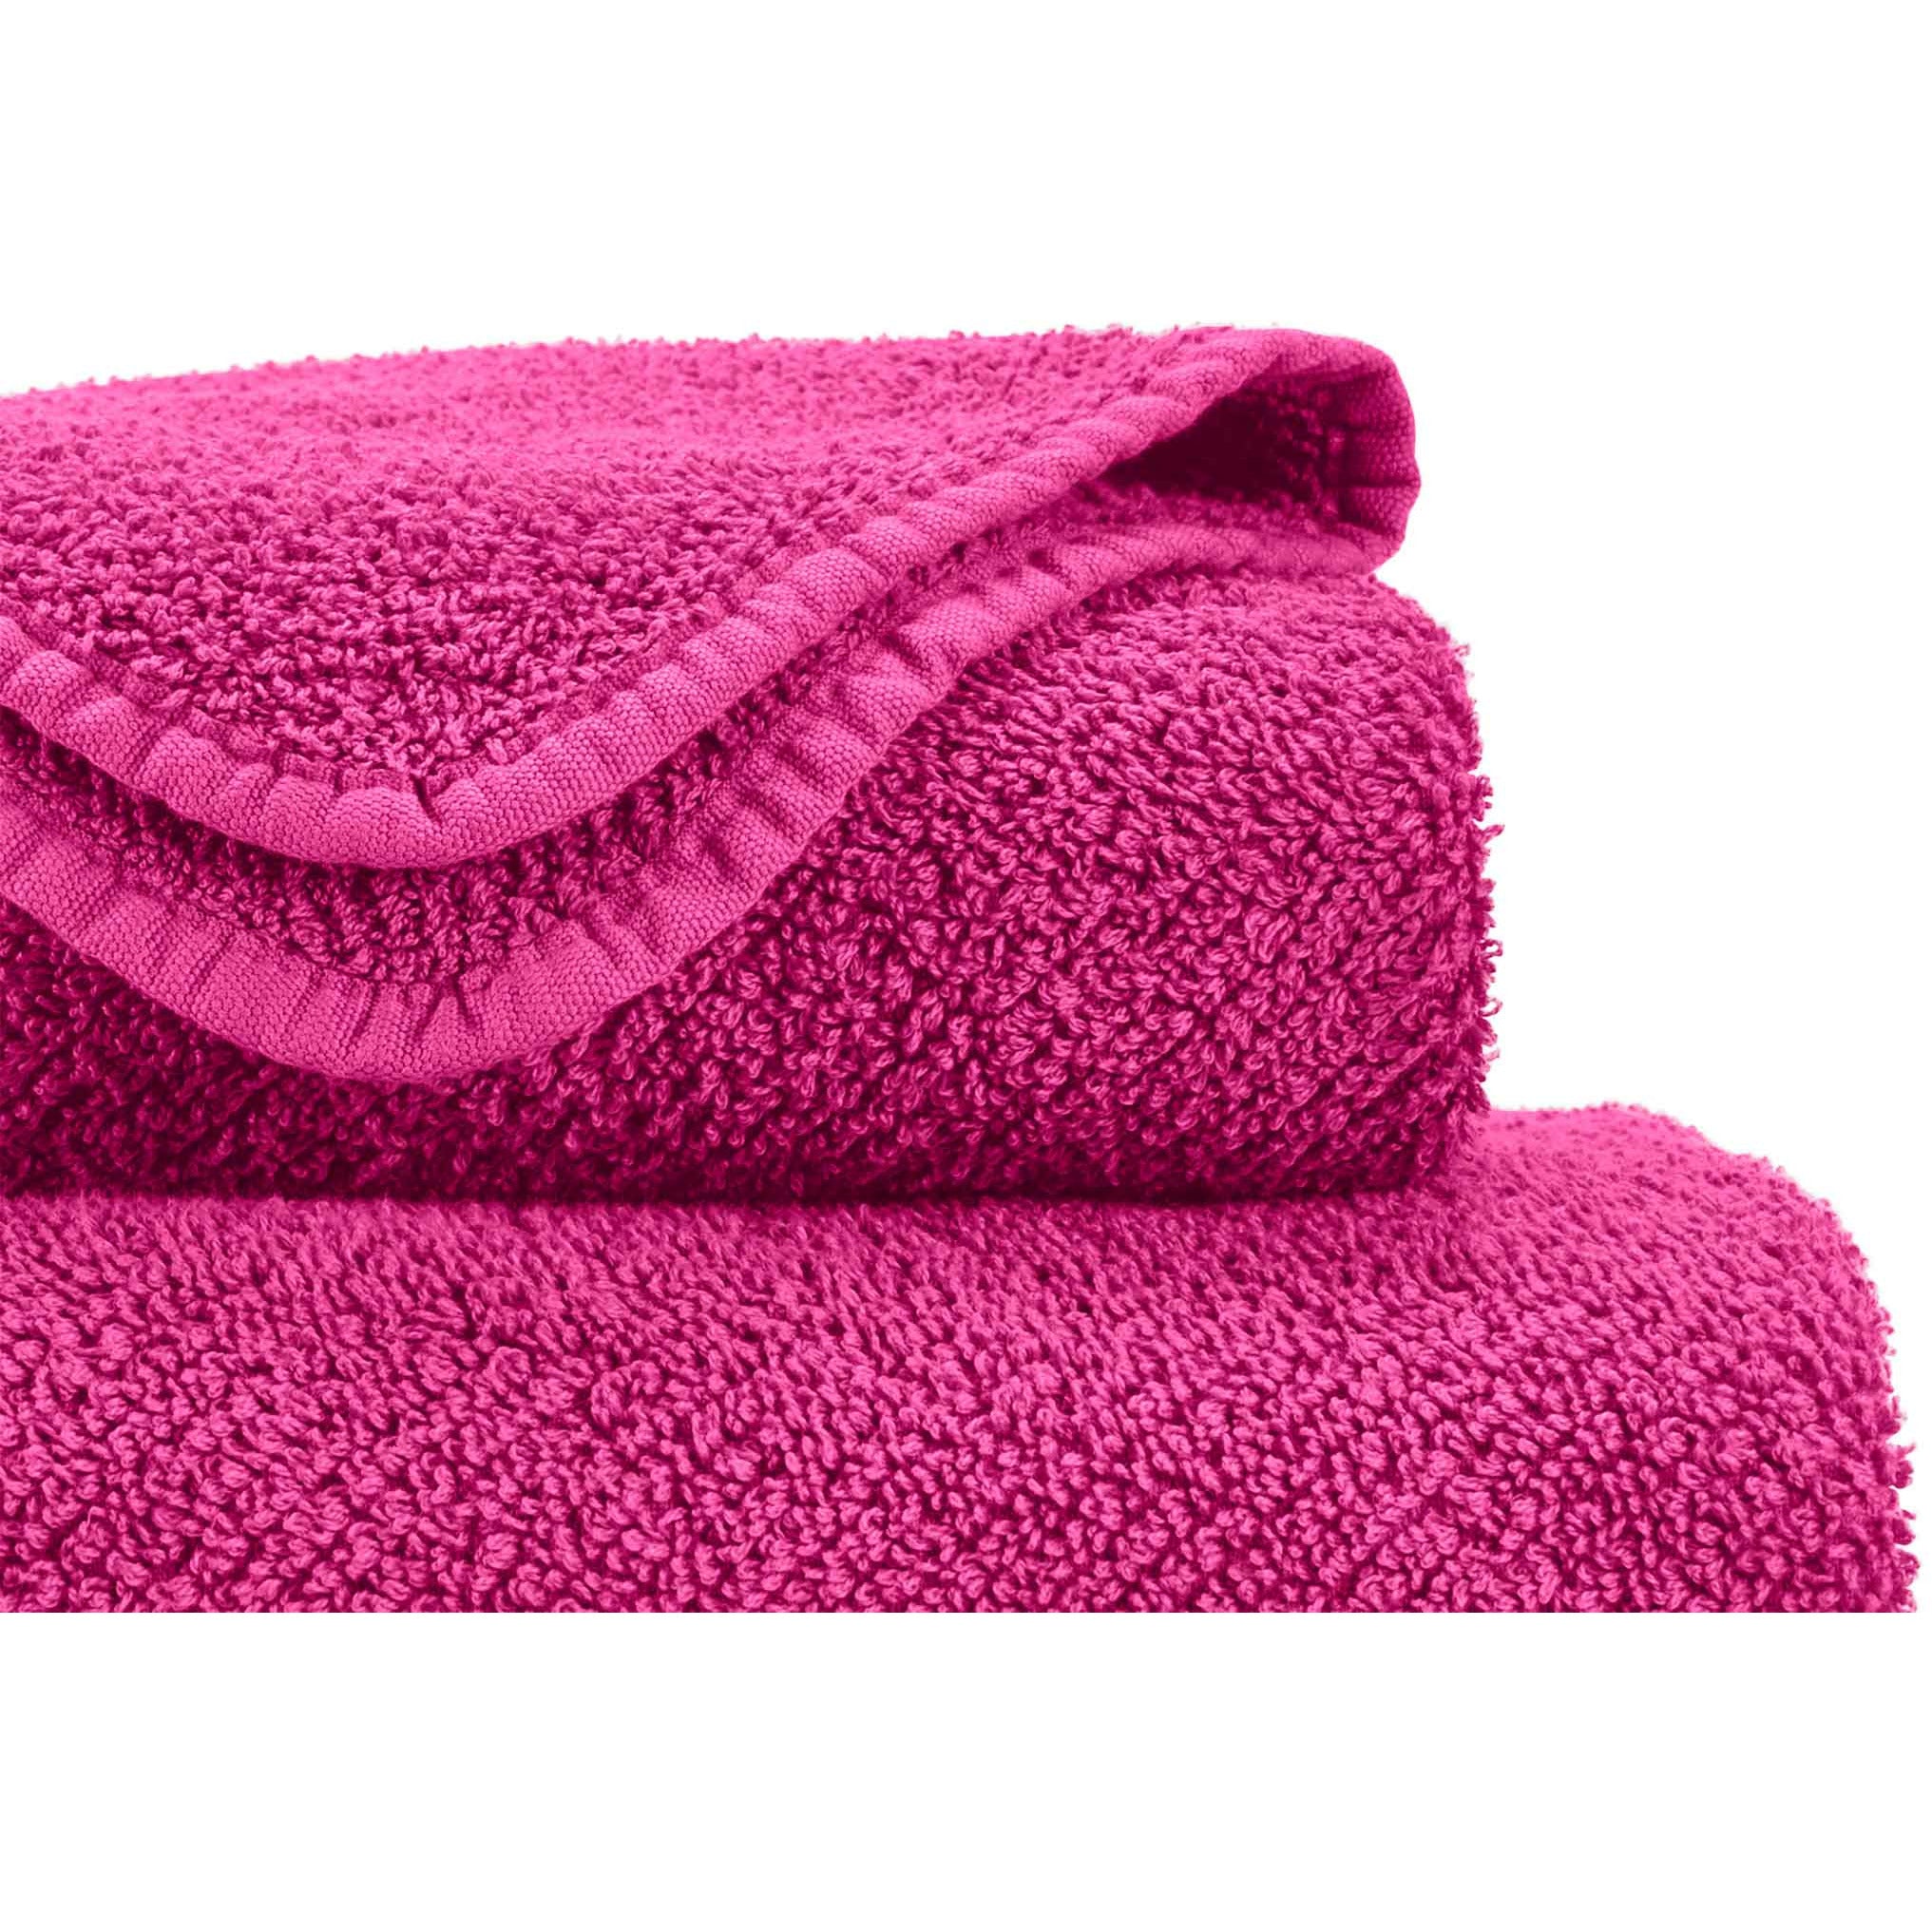 Abyss Super Pile Bath Towels and Mats - Flamingo (573)  Pink hand towels,  Pink bath towels, Reversible bath rugs